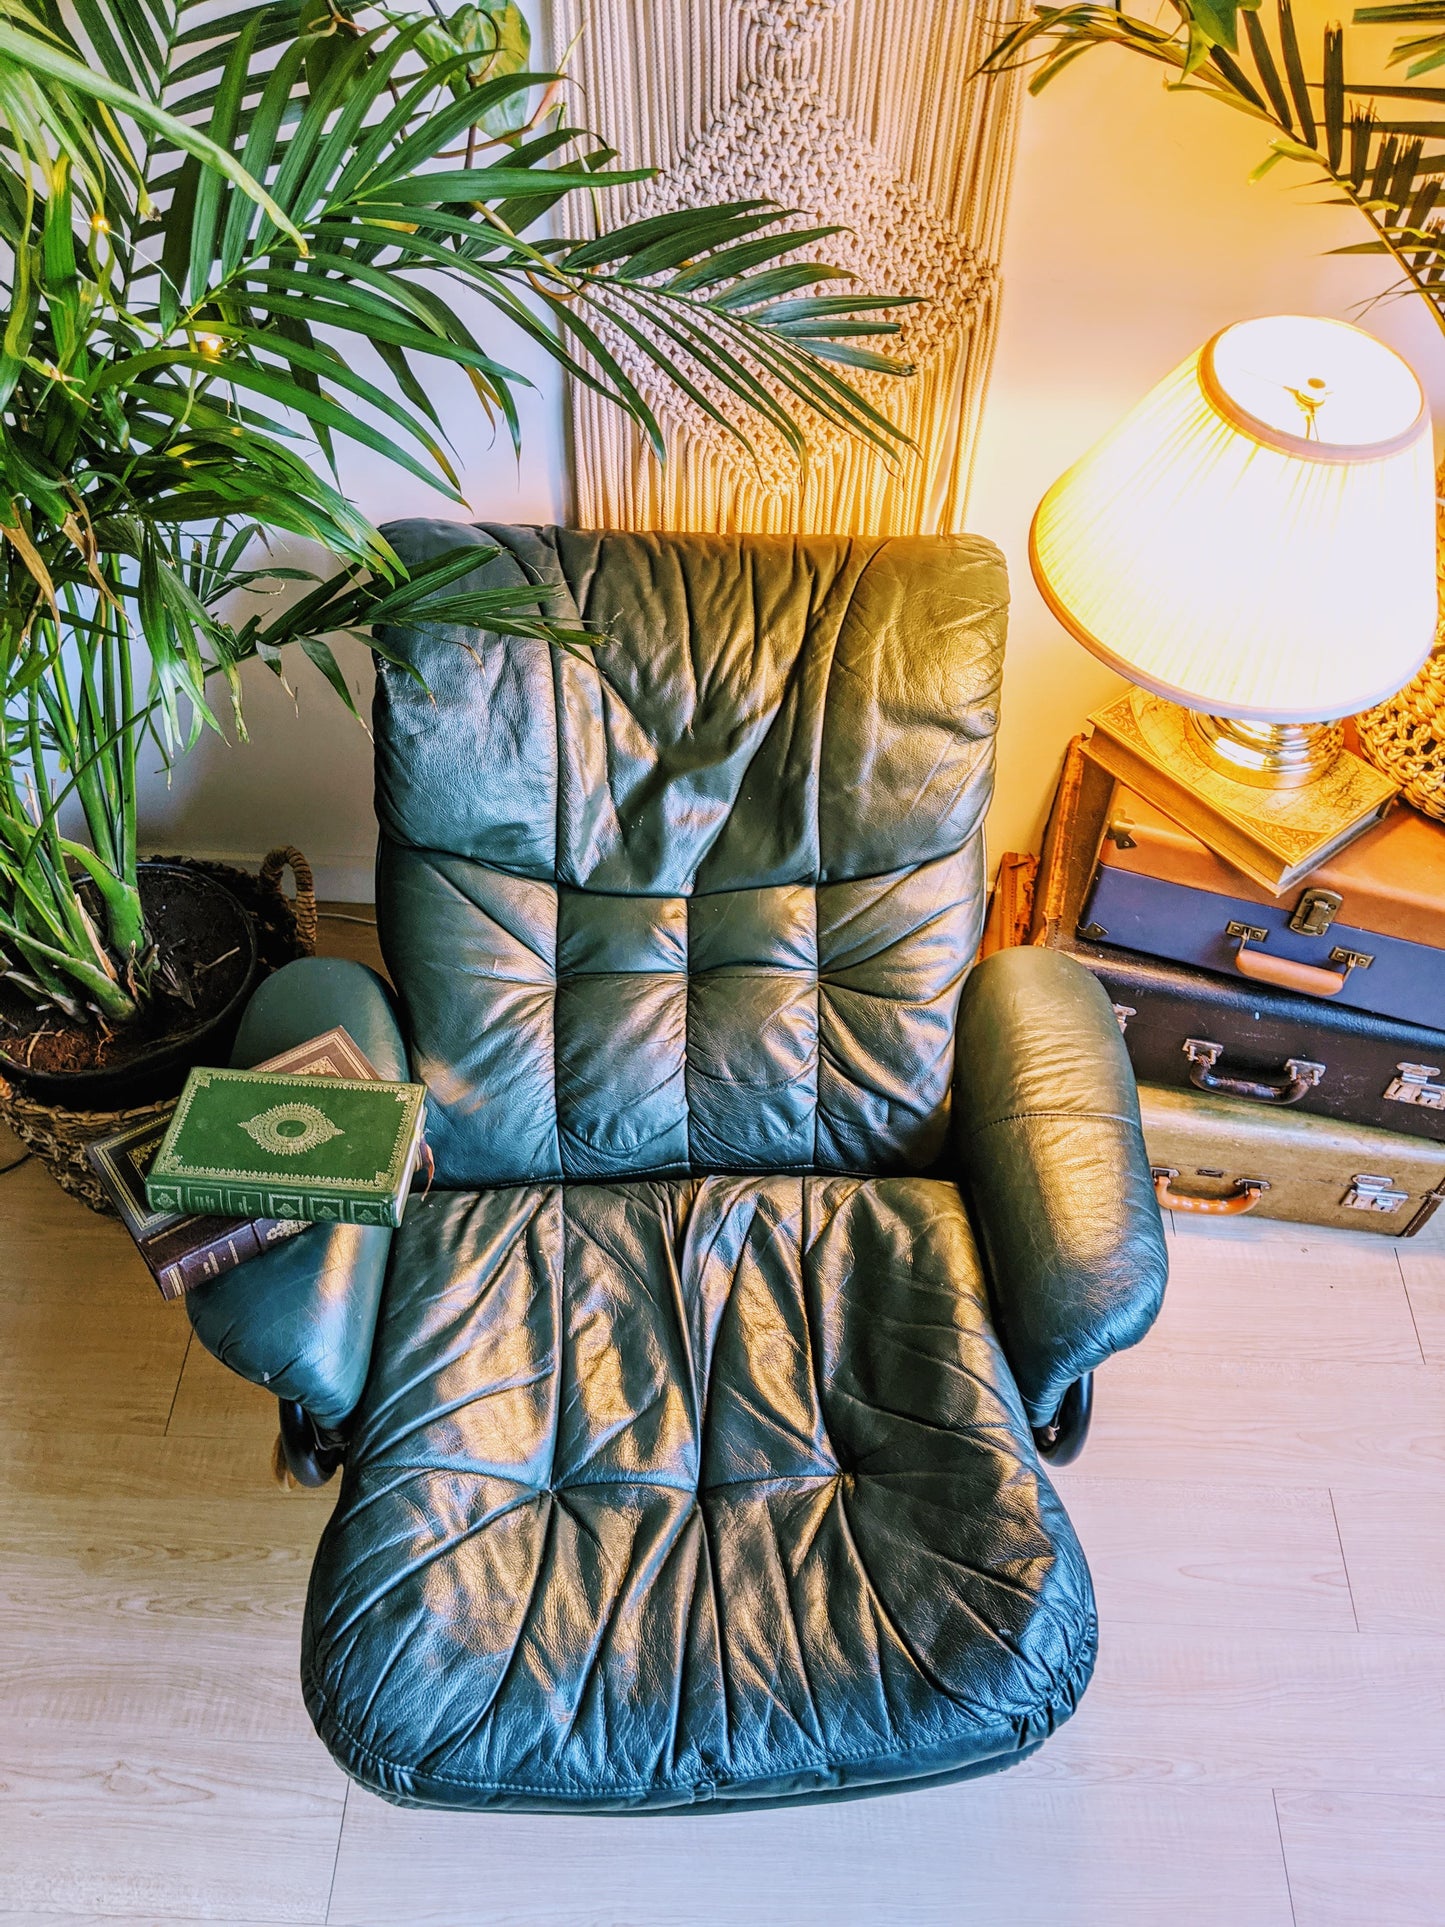 Lazboy chair 80s pine green recliner leather